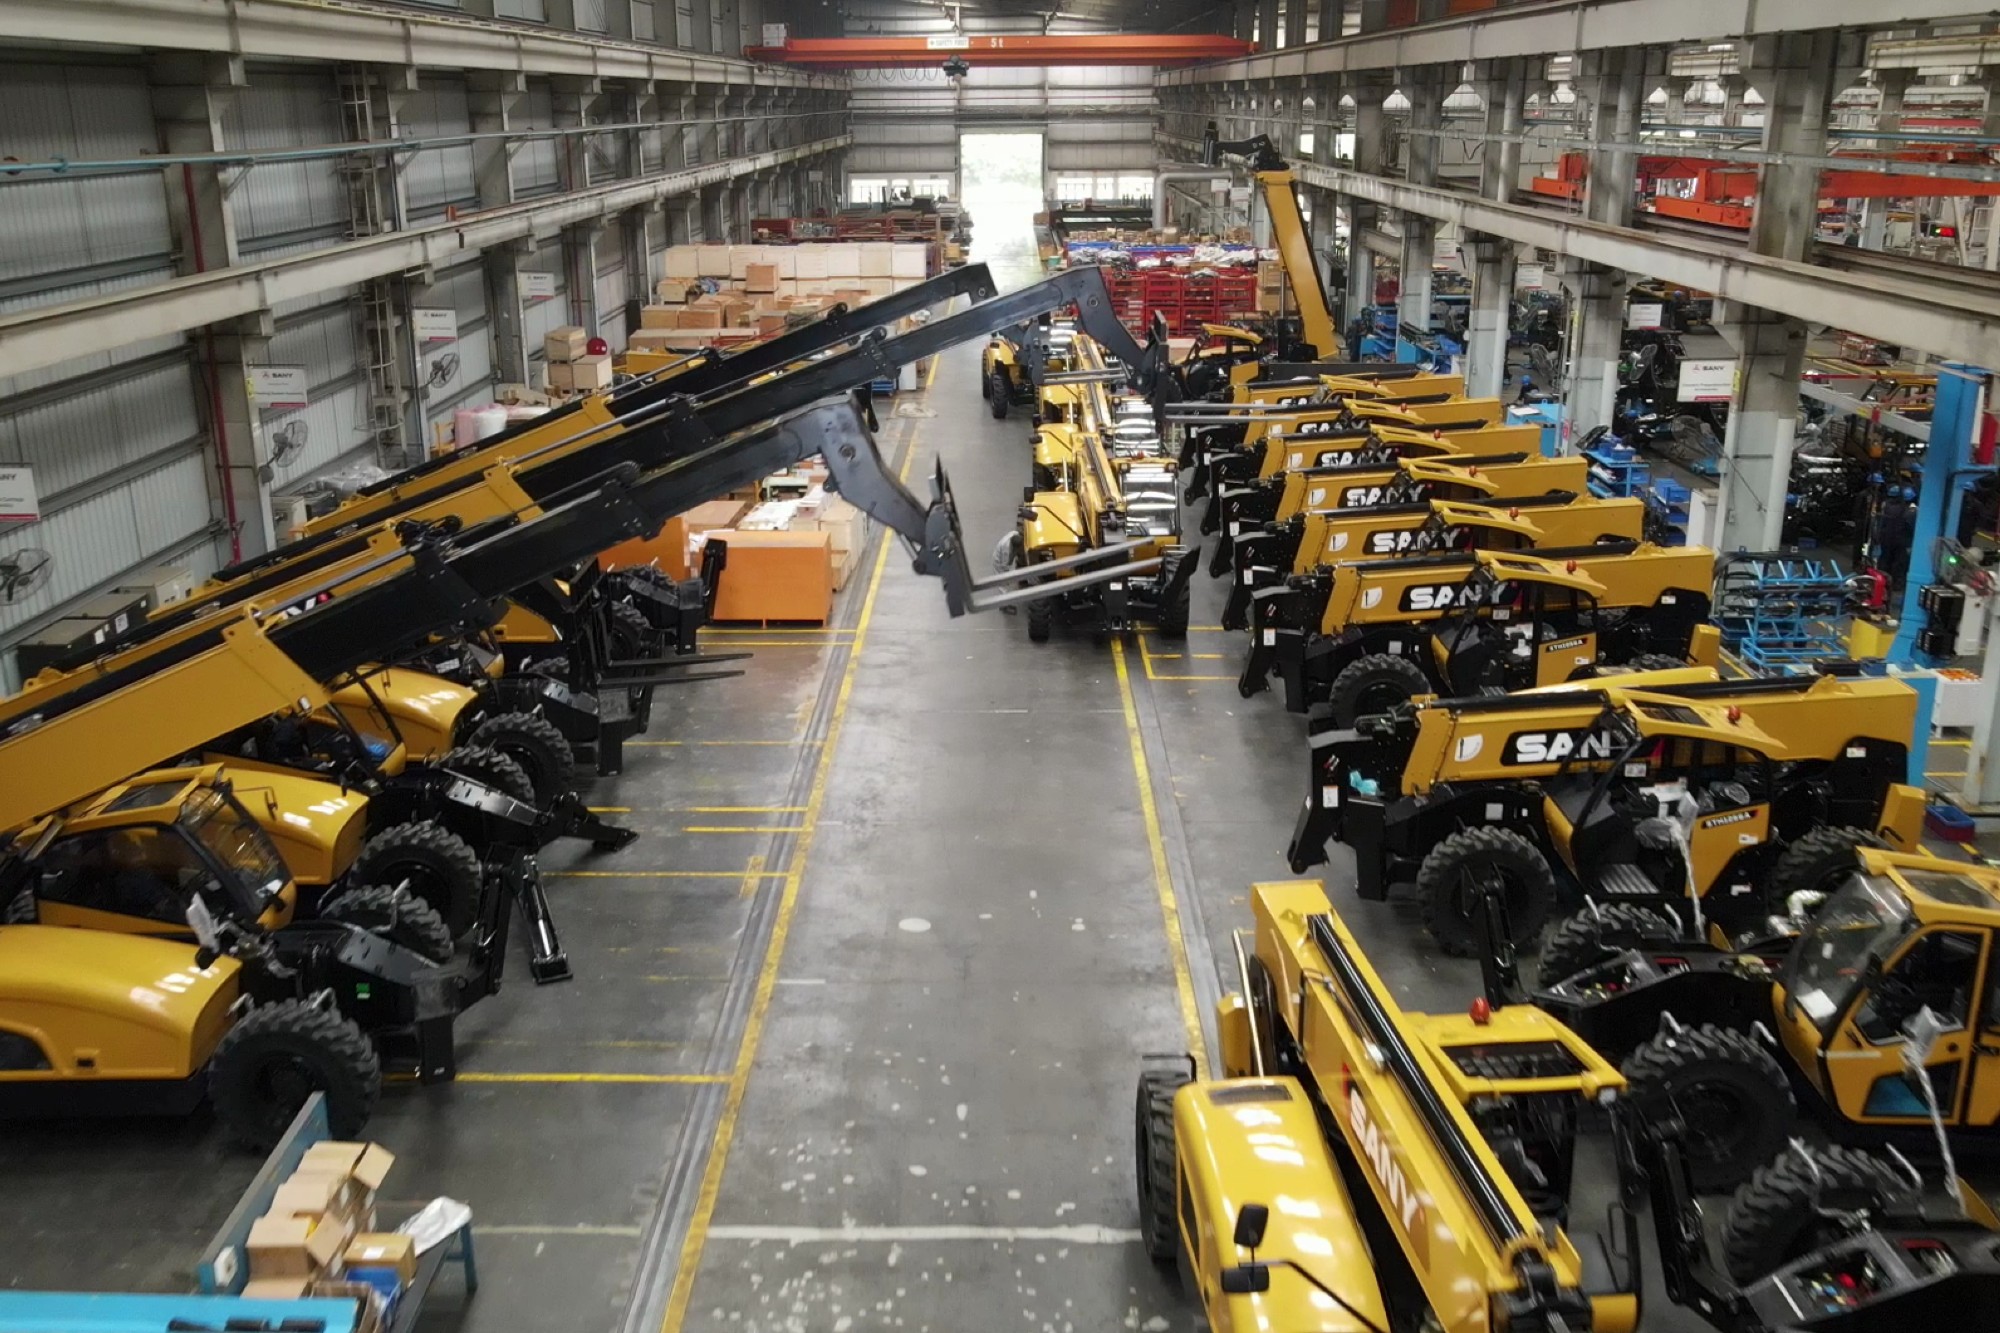 SANY India, a leading construction equipment manufacturer, is celebrating a significant milestone in its international expansion by successfully delivering over 1,000 Telehandlers to the United States. 